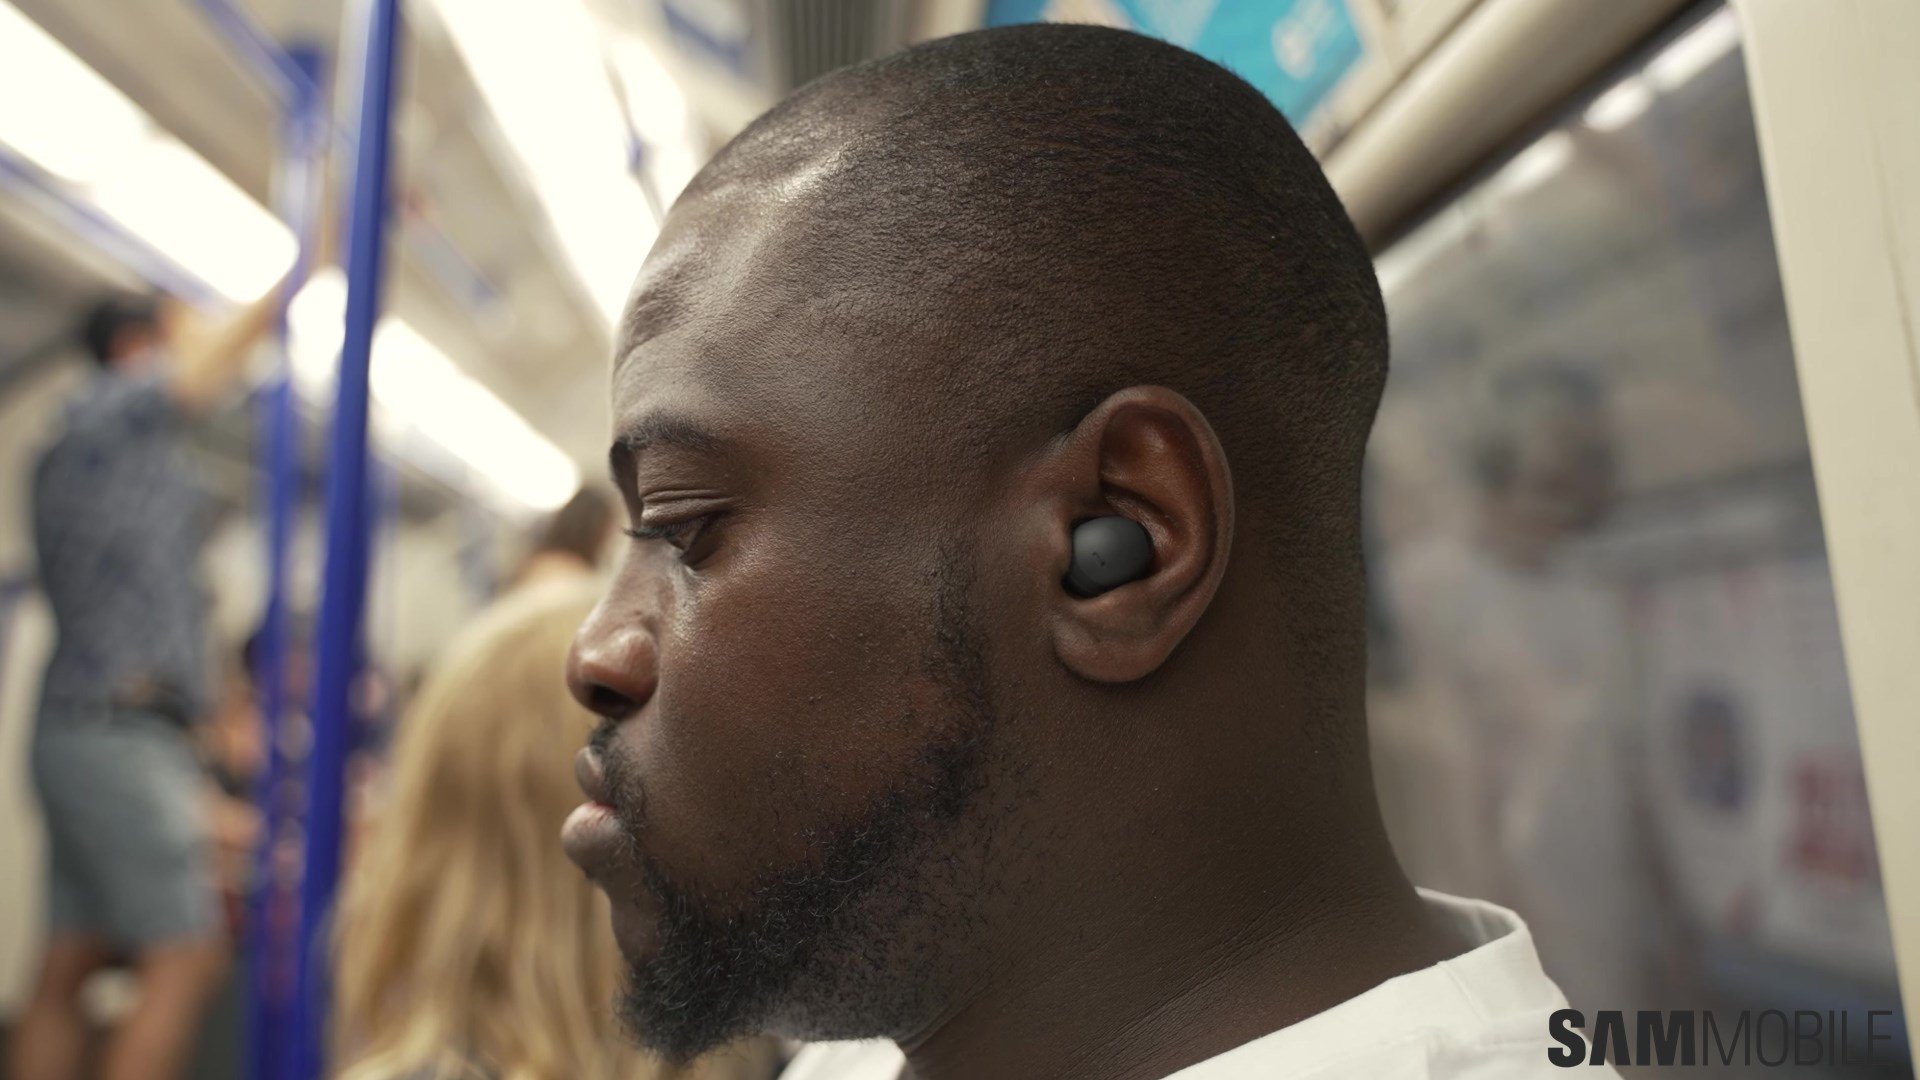 Advanced Ambient Sound features go live for the Galaxy Buds 2 Pro -  SamMobile